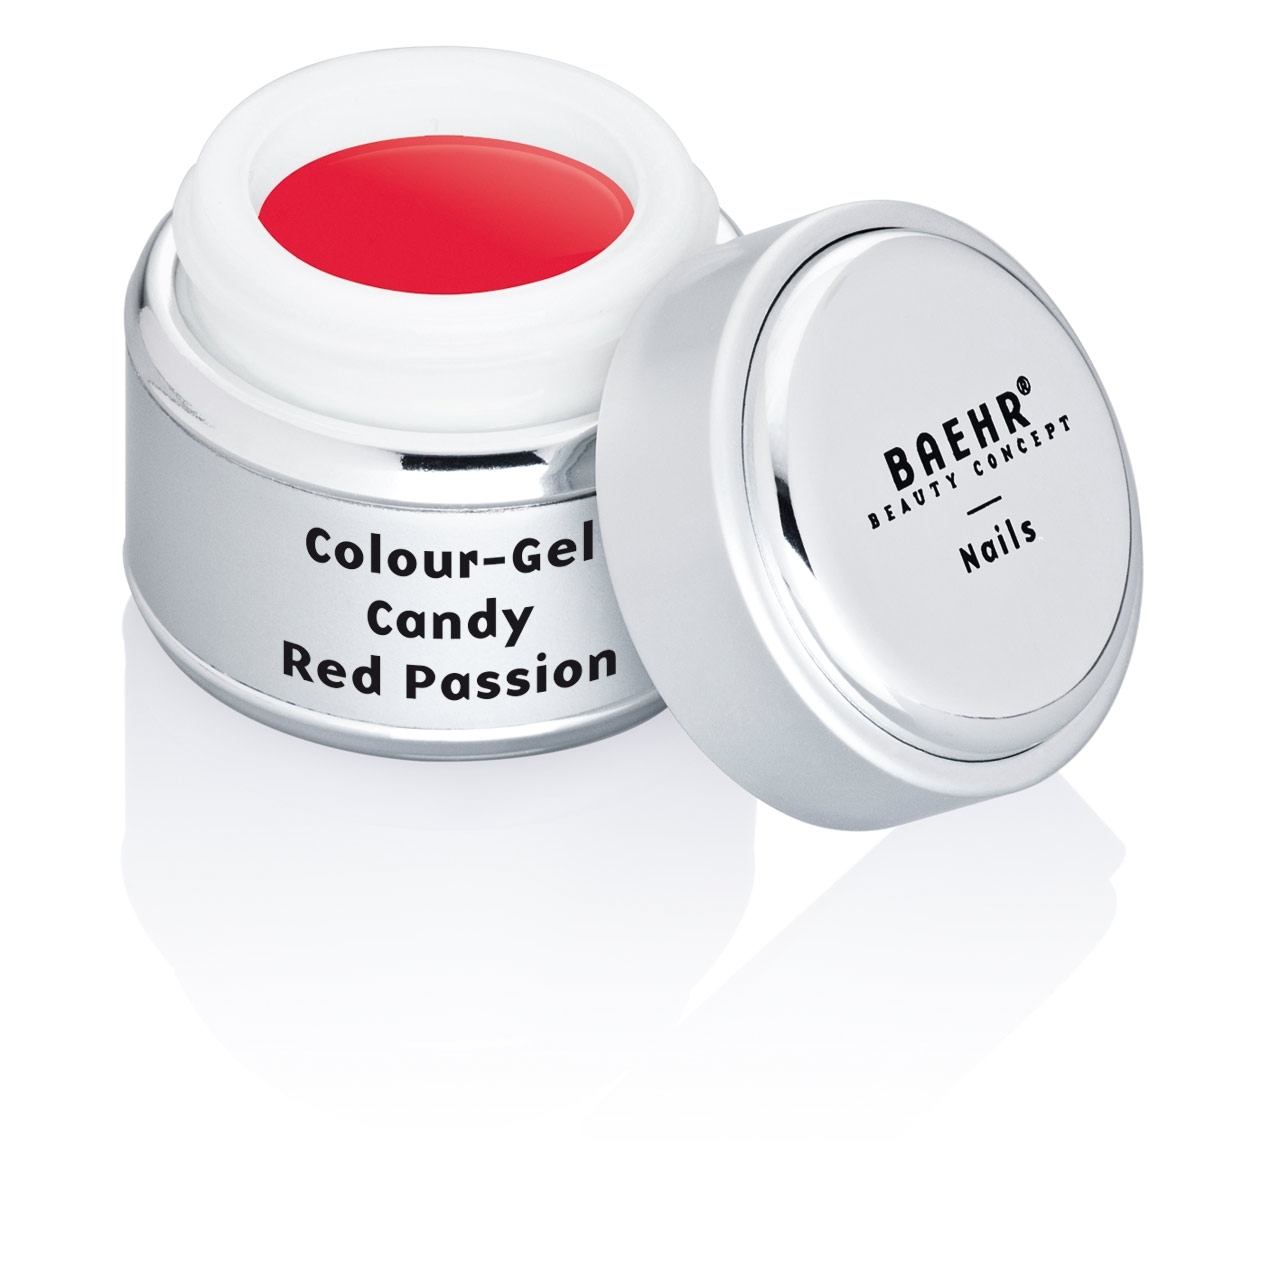 BAEHR BEAUTY CONCEPT - NAILS Colour-Gel Candy Red Passion 5 ml